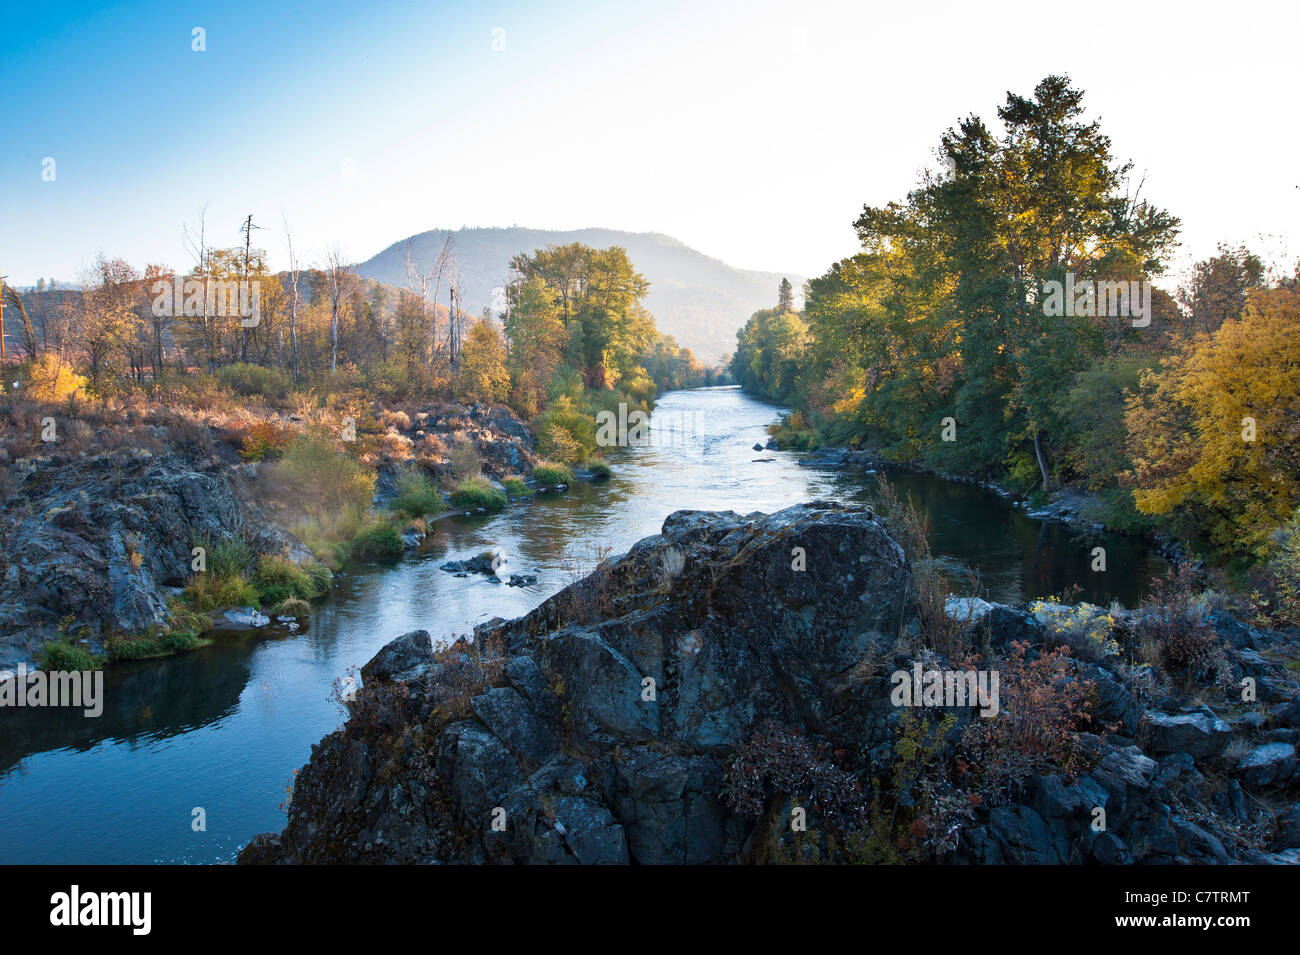 The Rogue River in southwestern Oregon in the United States flows about 215 miles (346 km) in a generally westward direction. Stock Photo